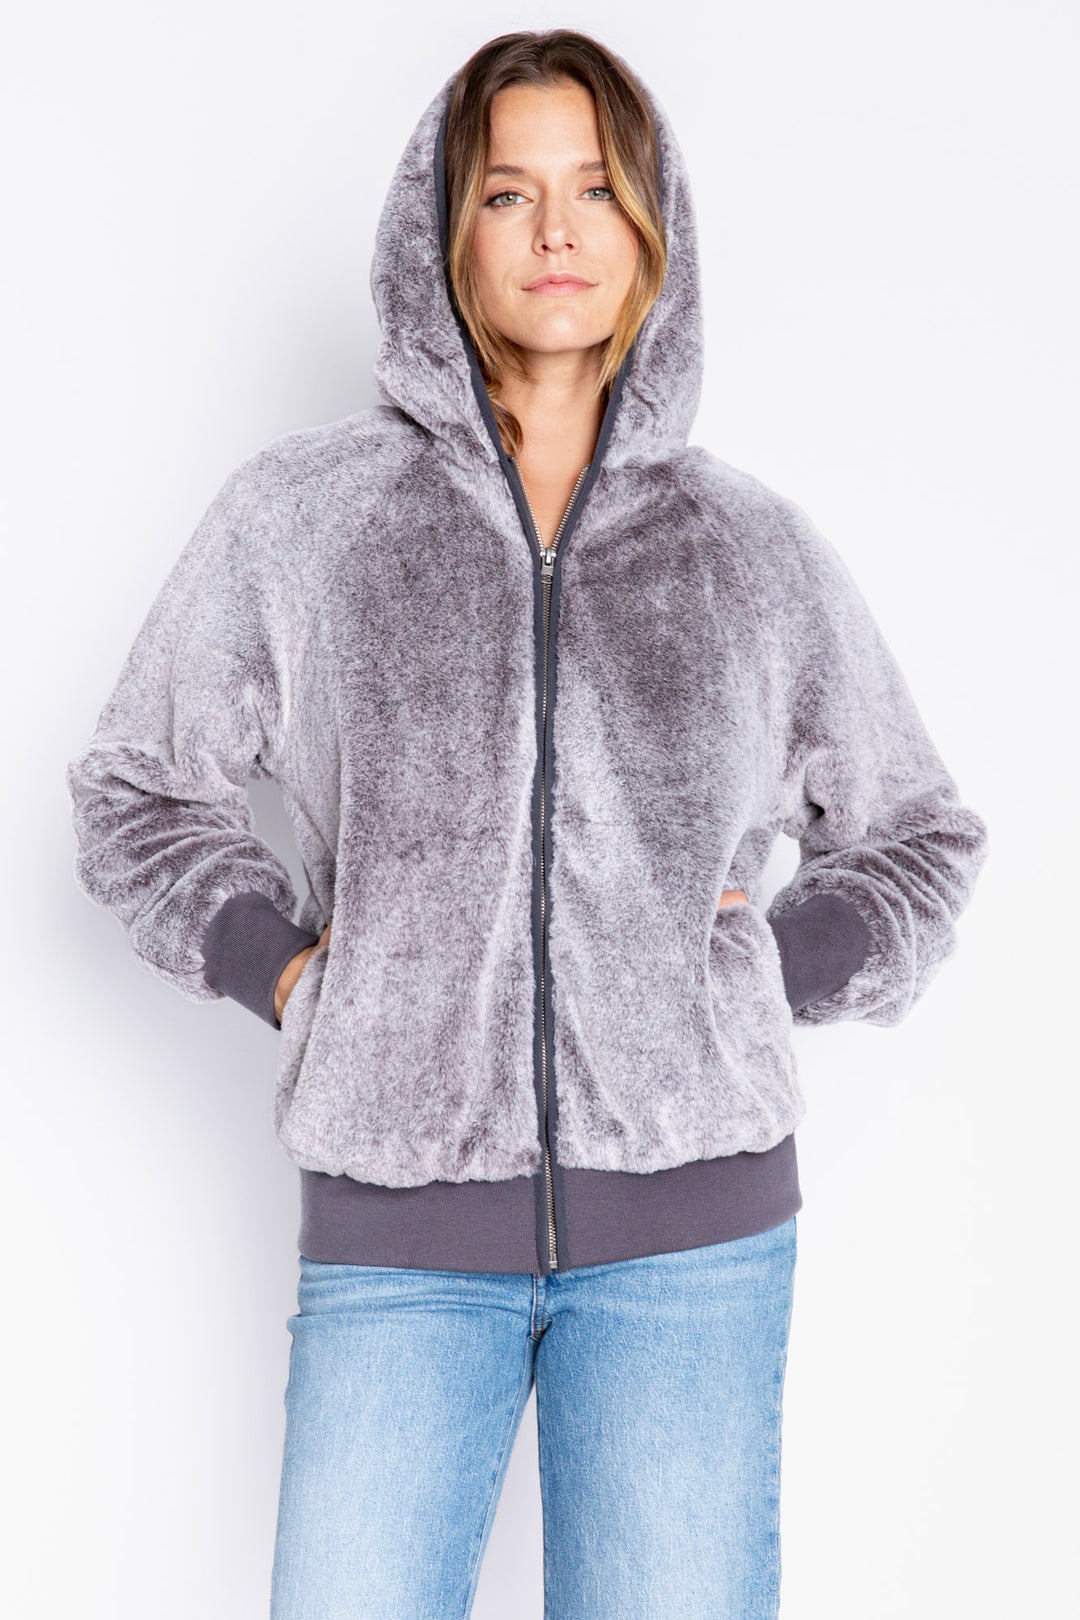 Charcoal grey faux fur zip-up jacket with hood. Printed inspirational message on inside lining. (6982897631332)